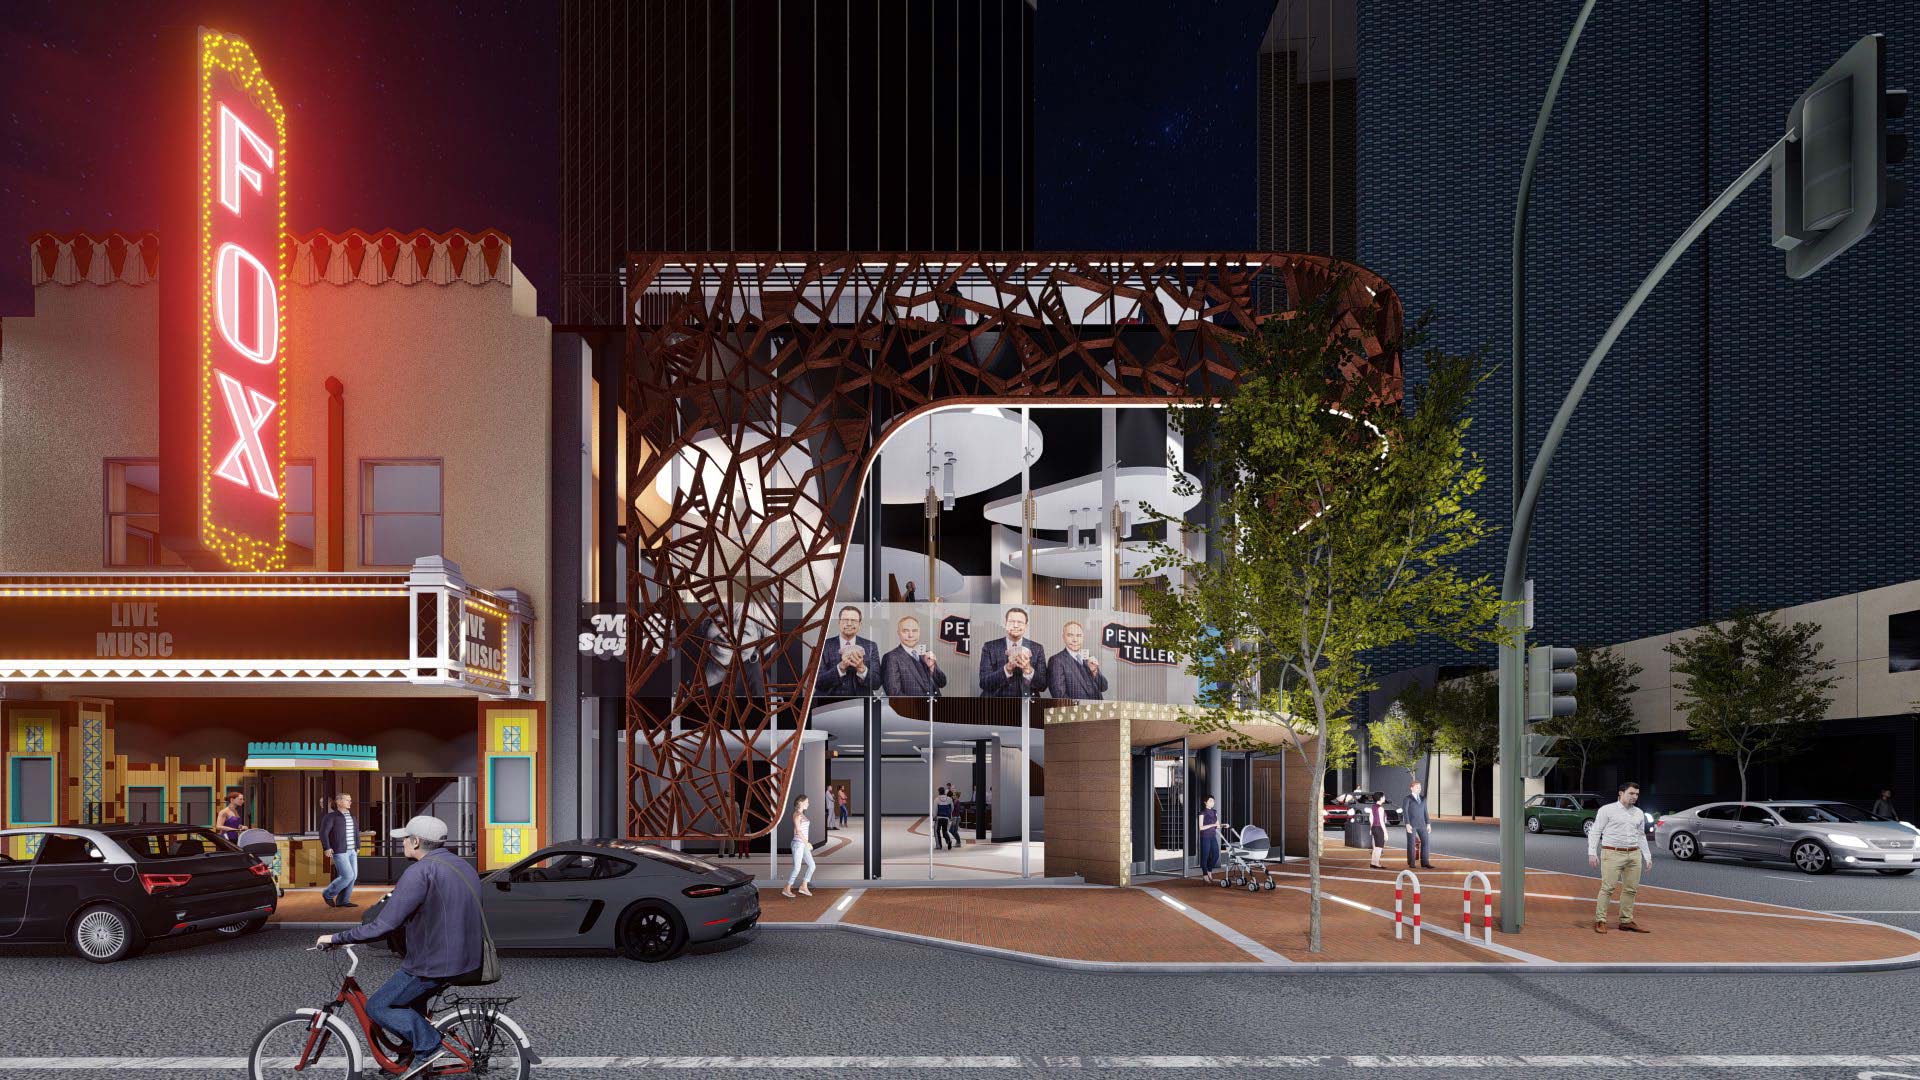 This rendering shows what architects propose for the redesign of the Fox Theatre.